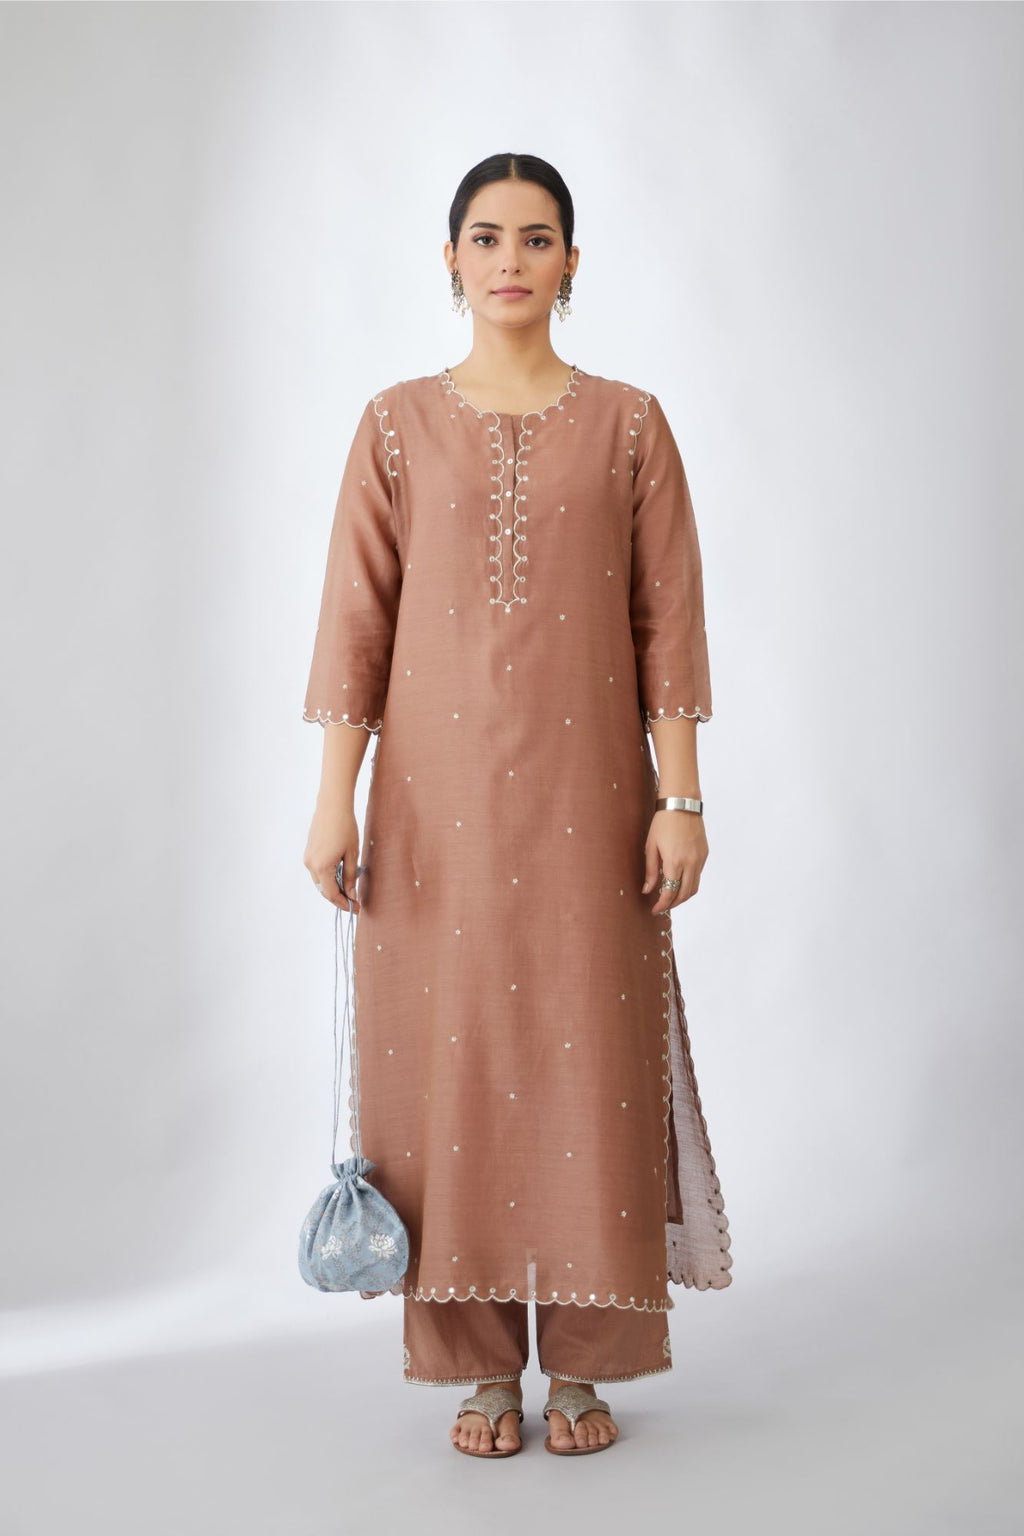 Silk chanderi straight kurta set with all-over delicate silver zari flowers and scalloped edges, highlighted with mirror hand work.